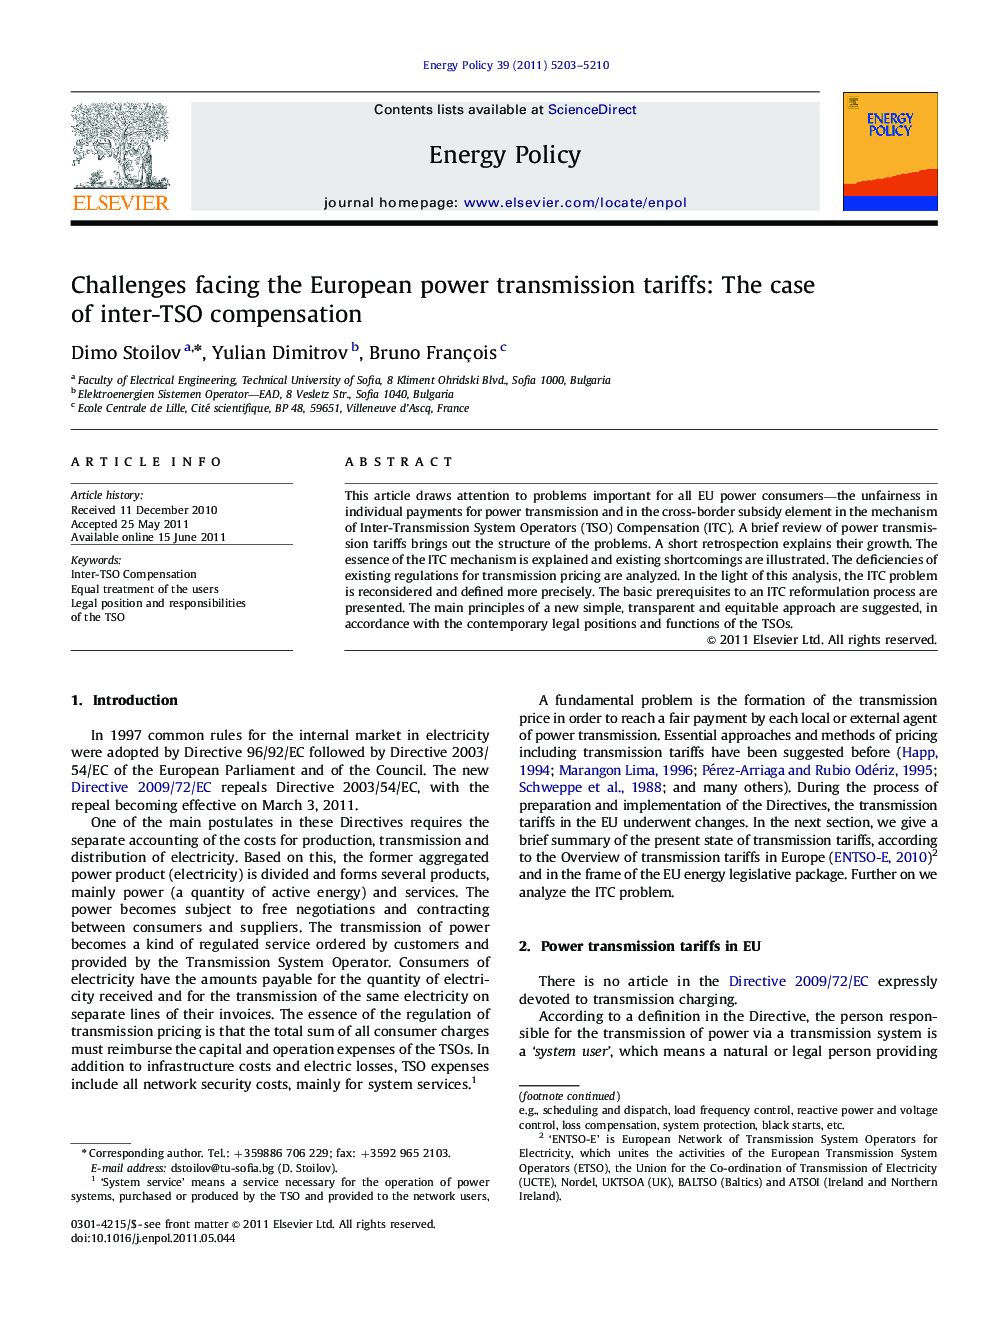 Challenges facing the European power transmission tariffs: The case of inter-TSO compensation